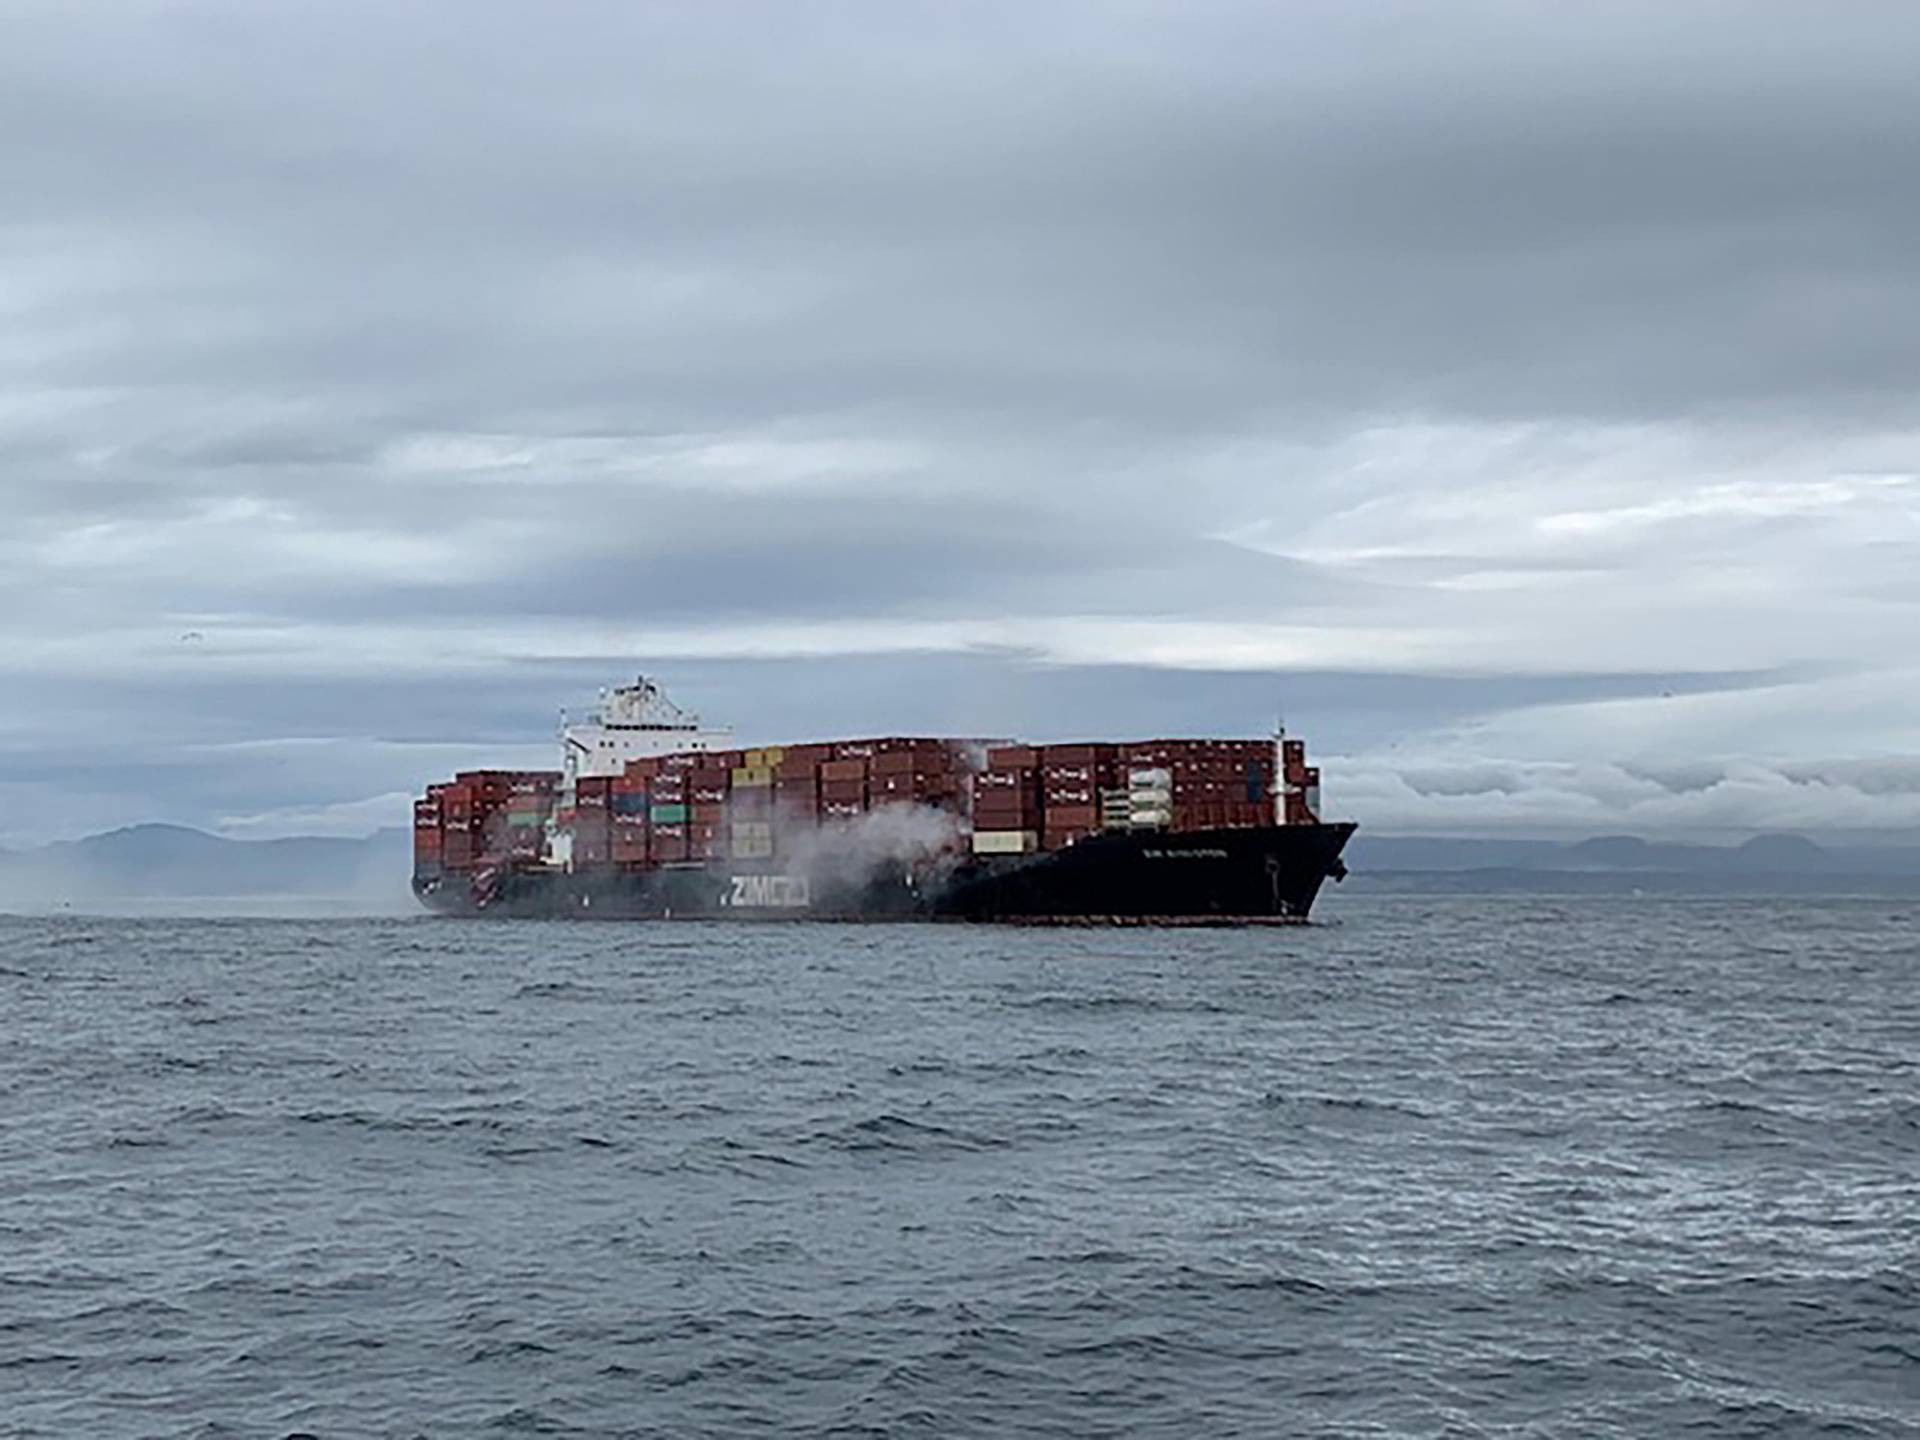 The container ship Zim Kingston burns from a fire off the coast of Victoria